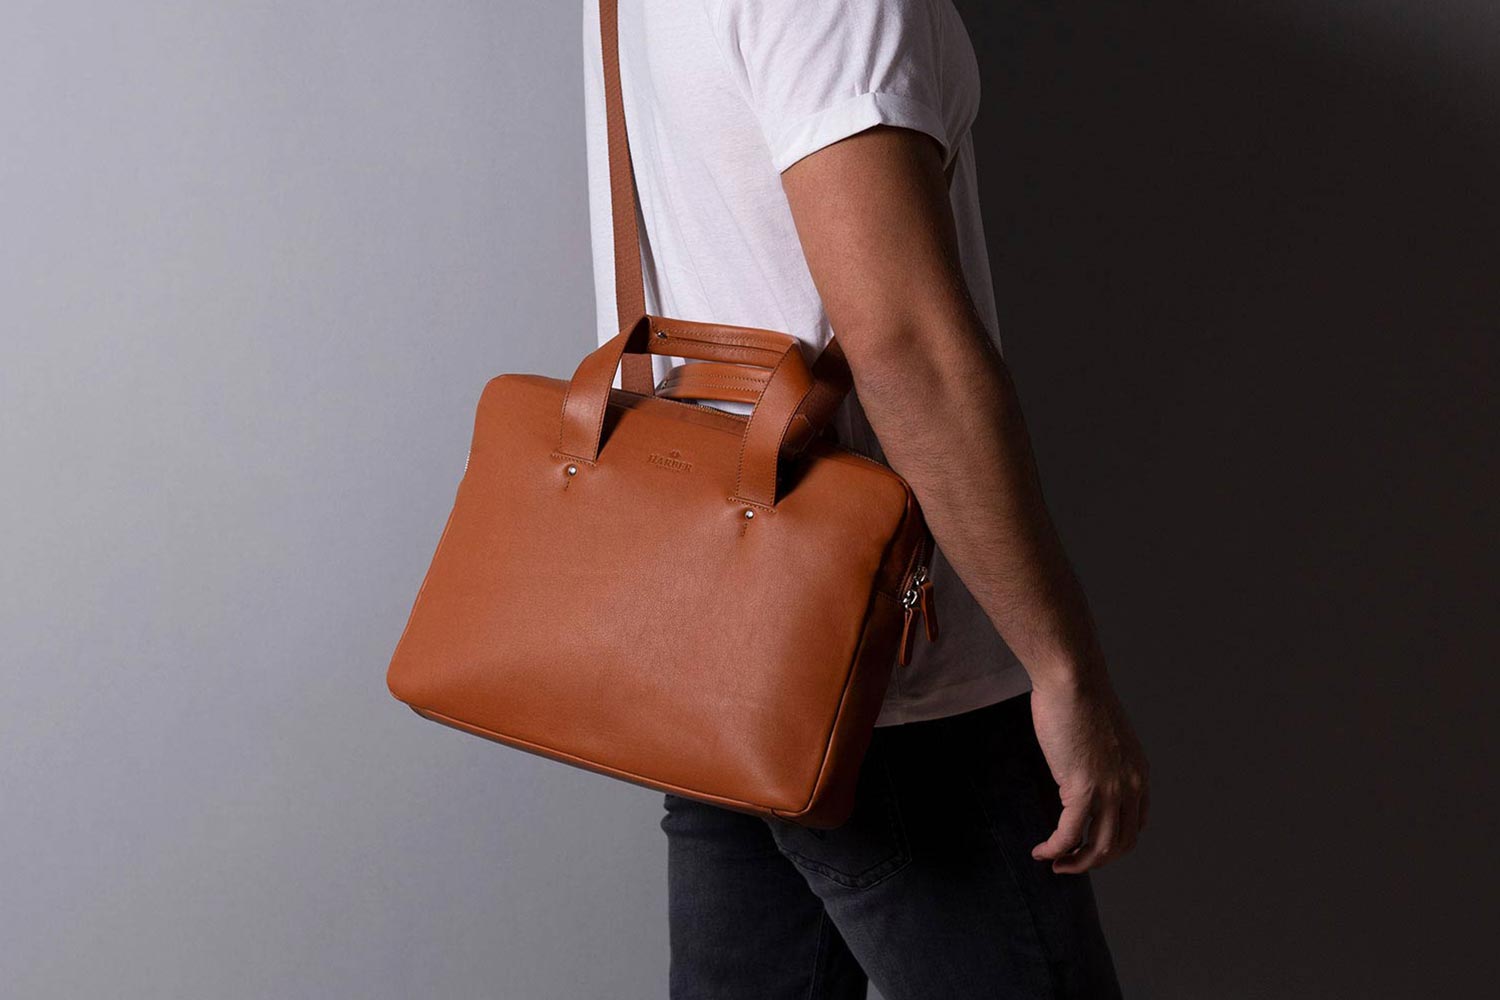 Man in white T-shirt wearing tan leather briefcase. Image via Harber London.